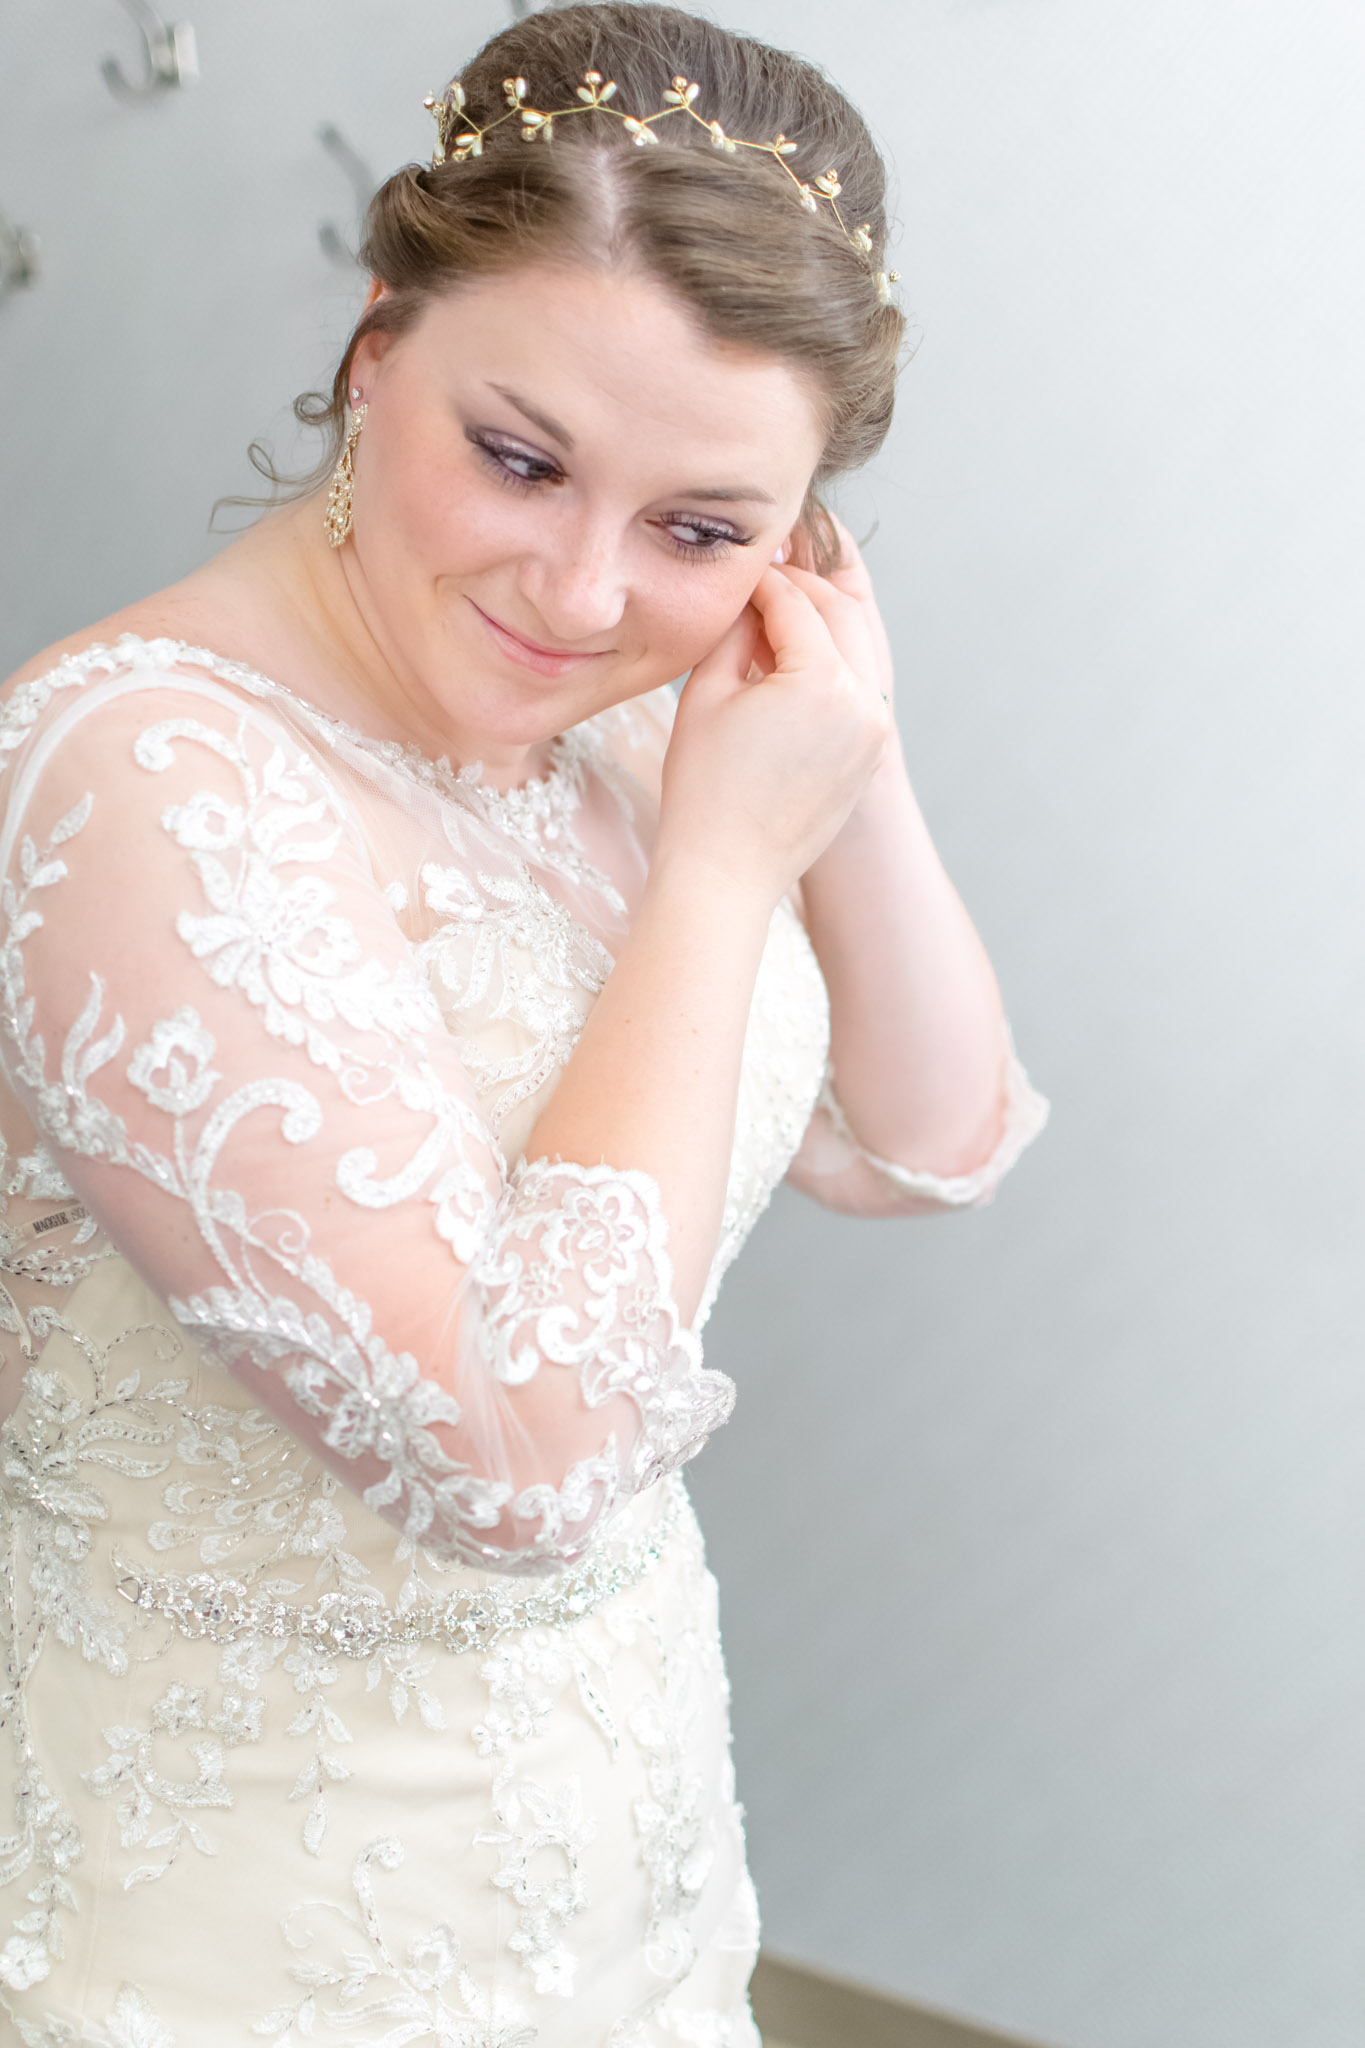 Indianapolis bride puts on earrings on wedding day